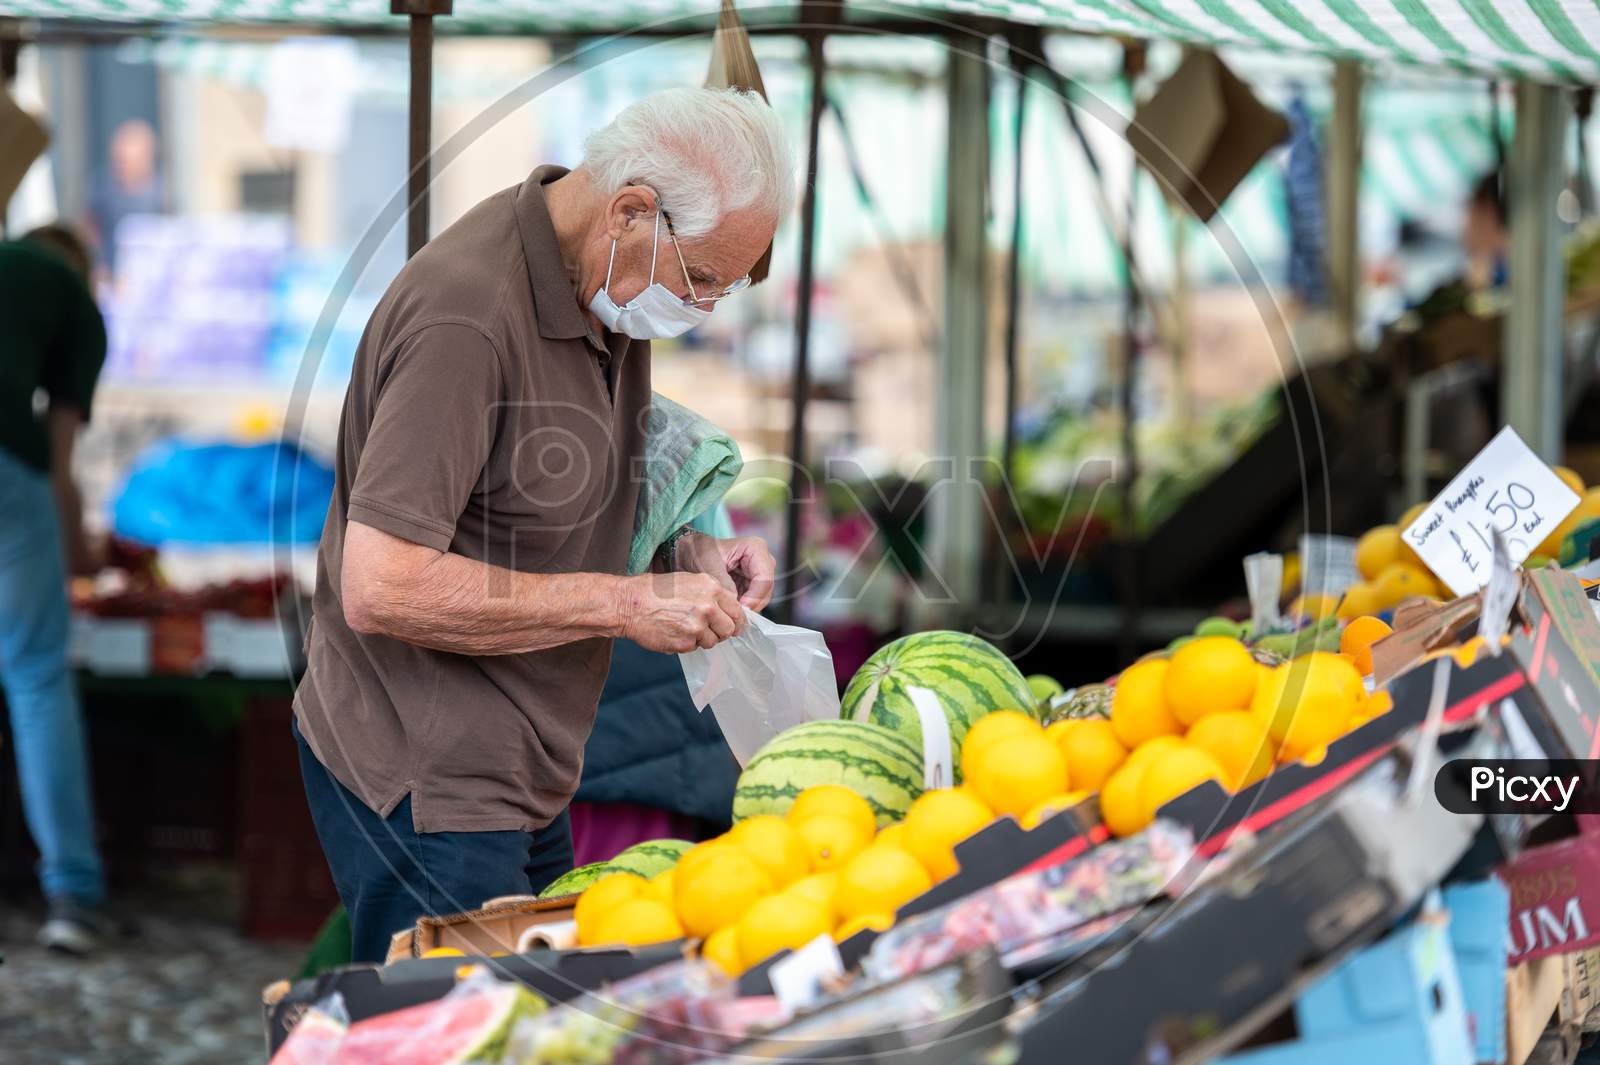 An Elderly Man Wearing A Protective Face Mask At An Outdoor Fruit And Veg Market Stall